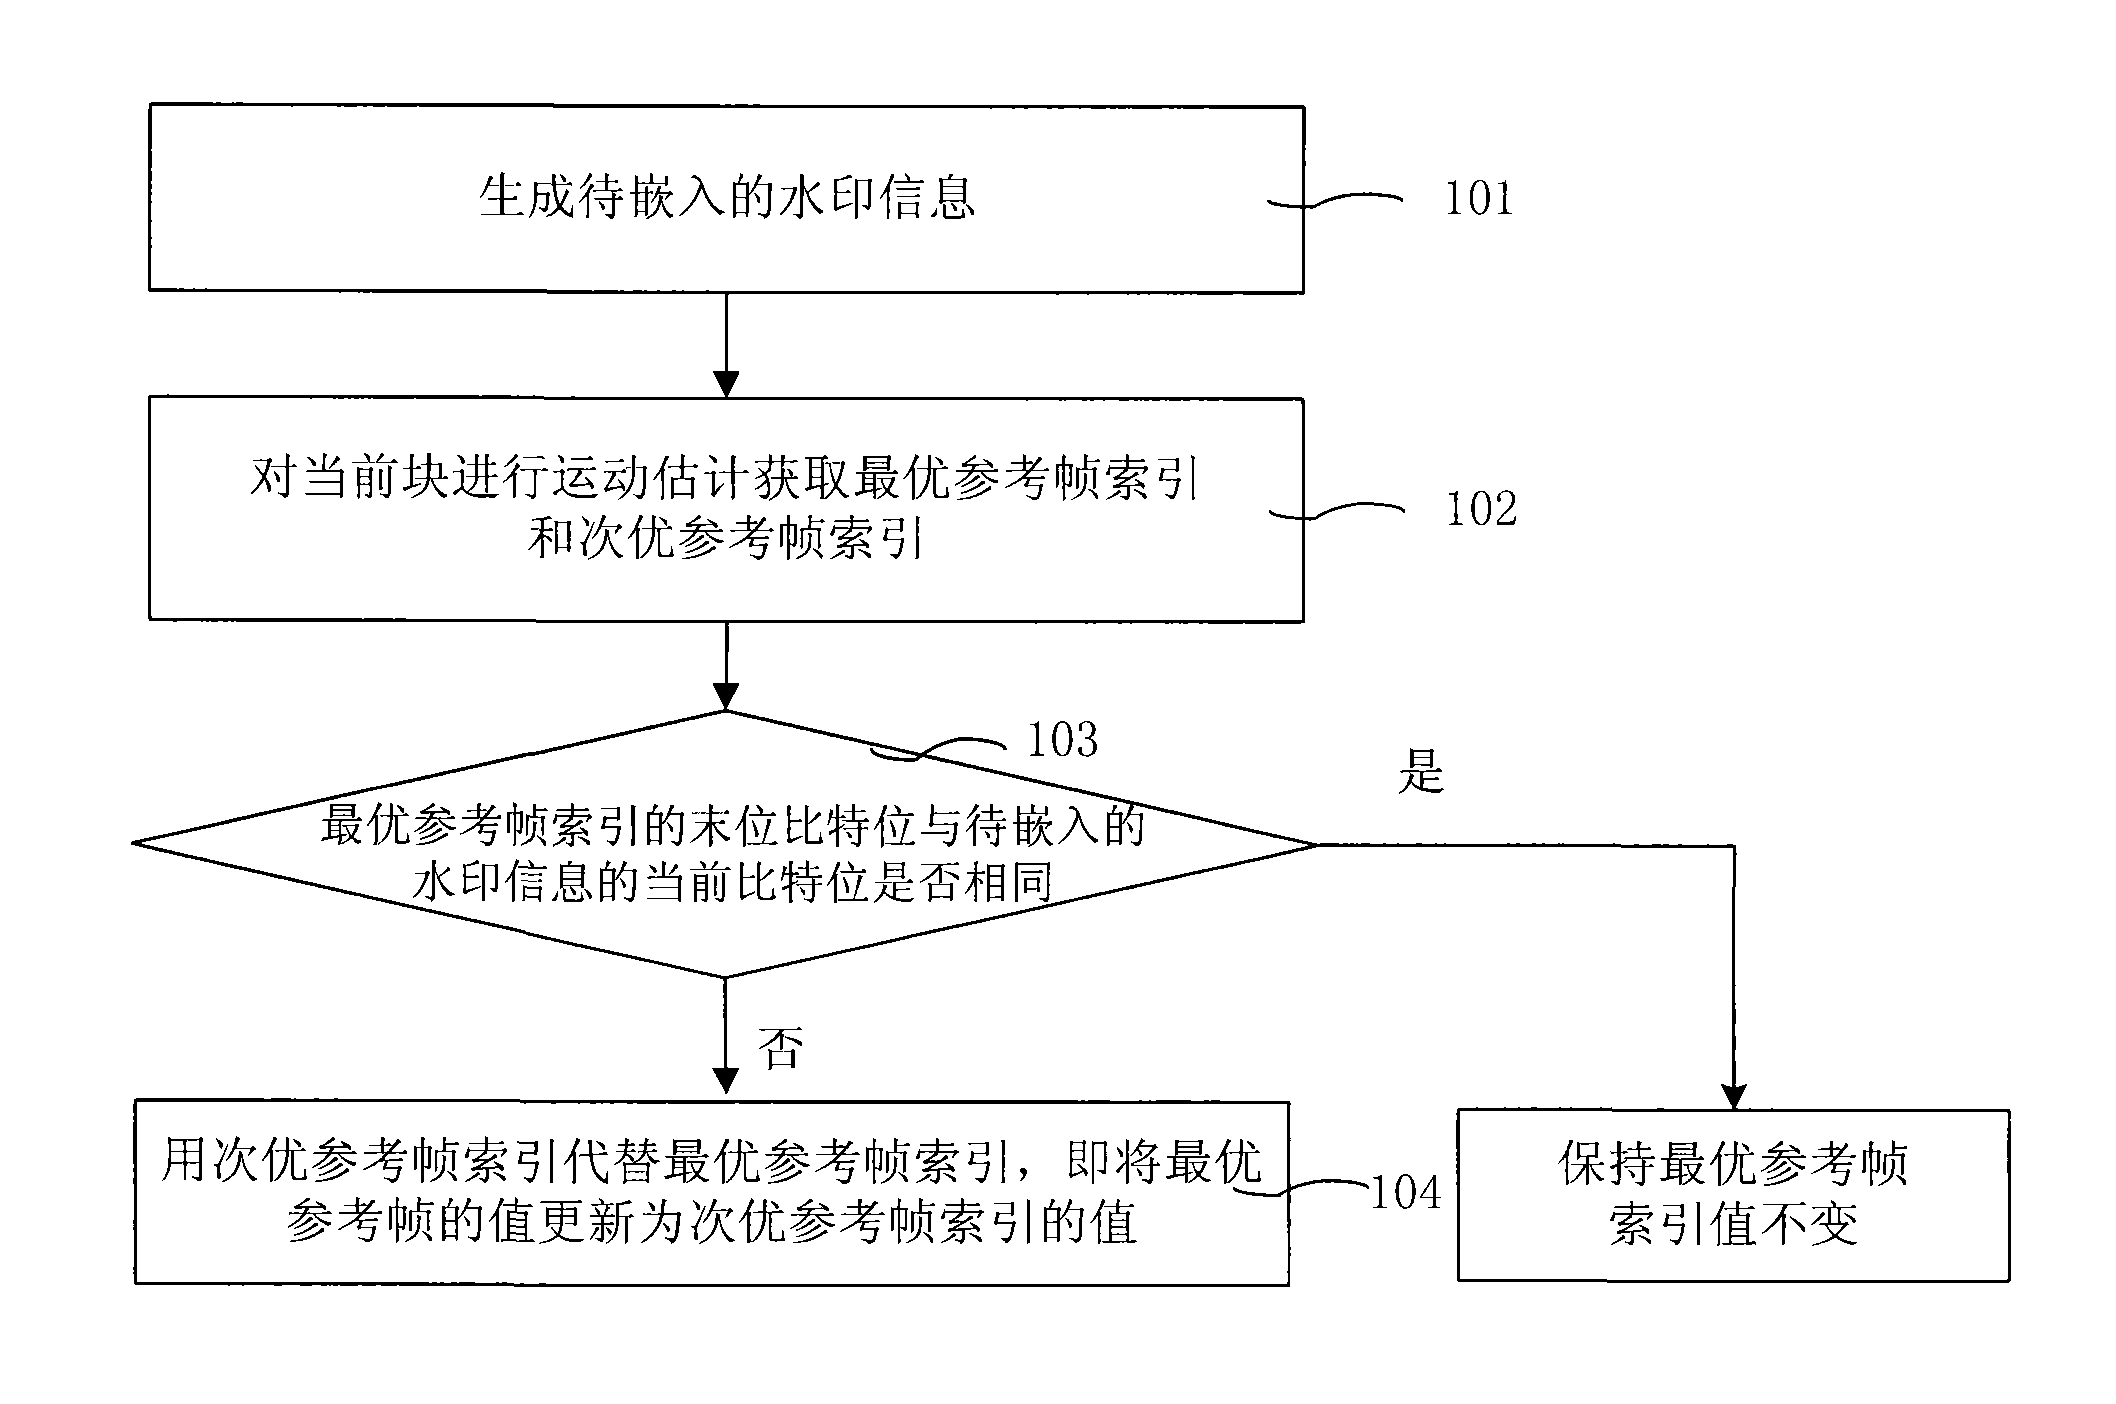 Method and device for embedding watermarking information and method and device for authenticating watermarking information